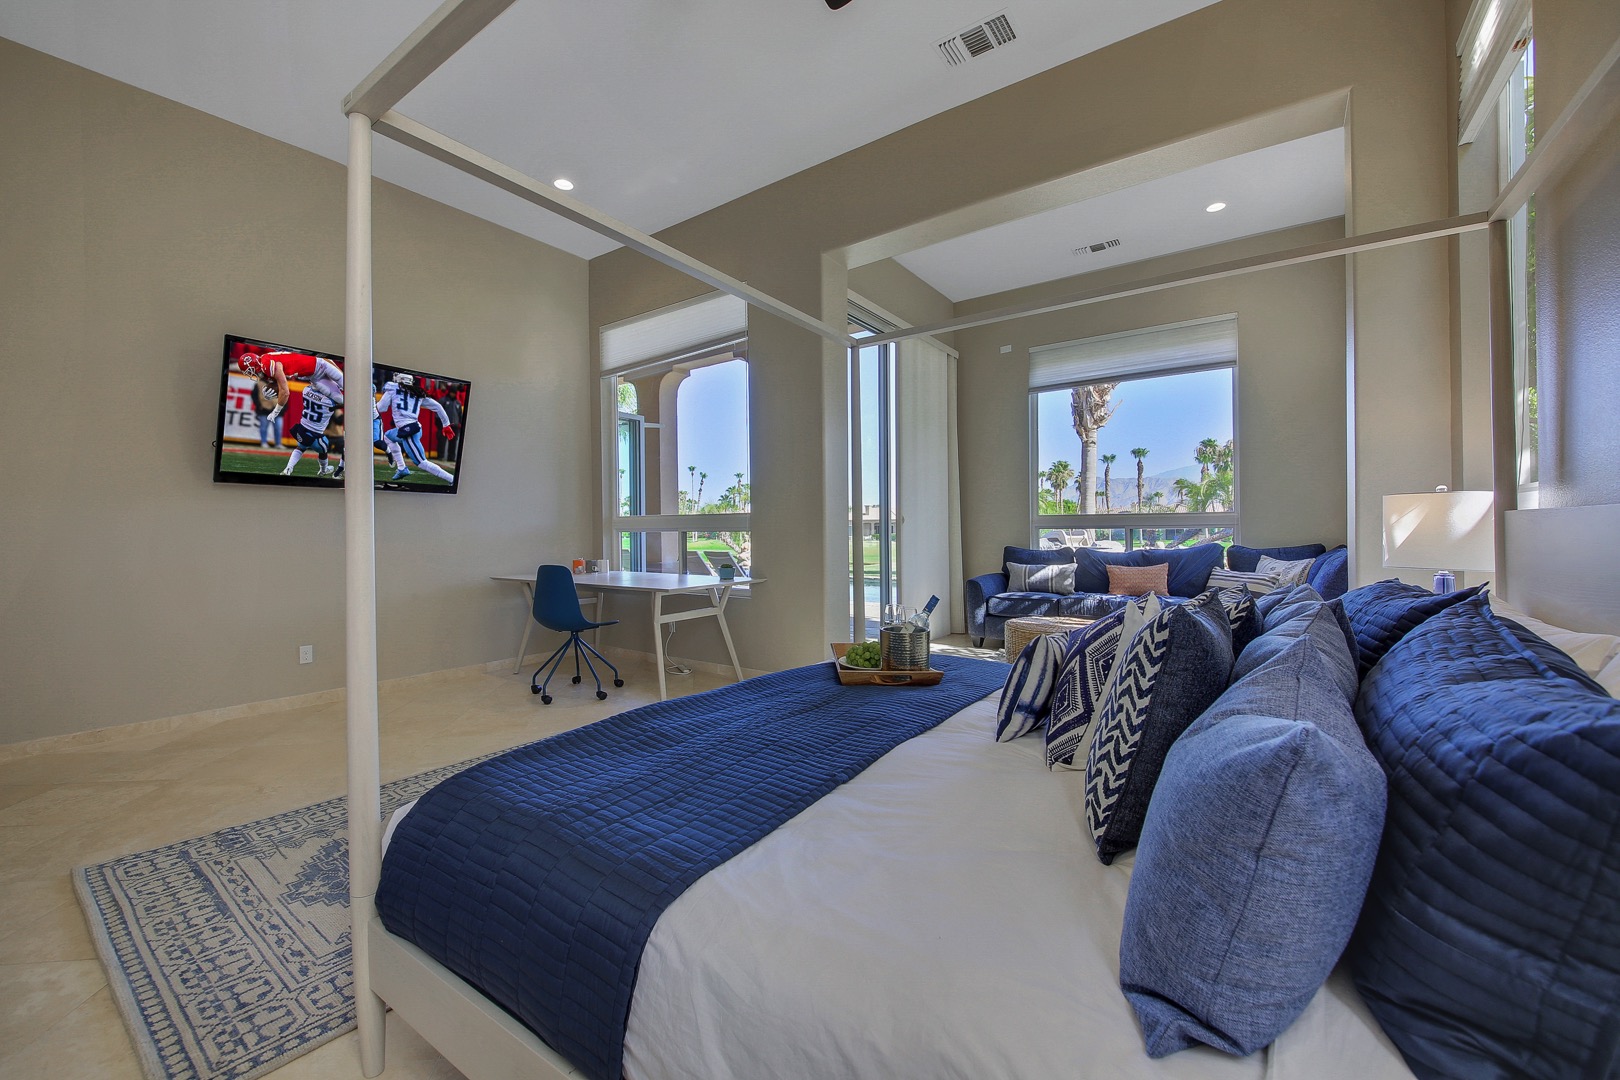 Enjoy the view of the famous Laquinta mountains from bed or the view of the 60-inch high def TV.